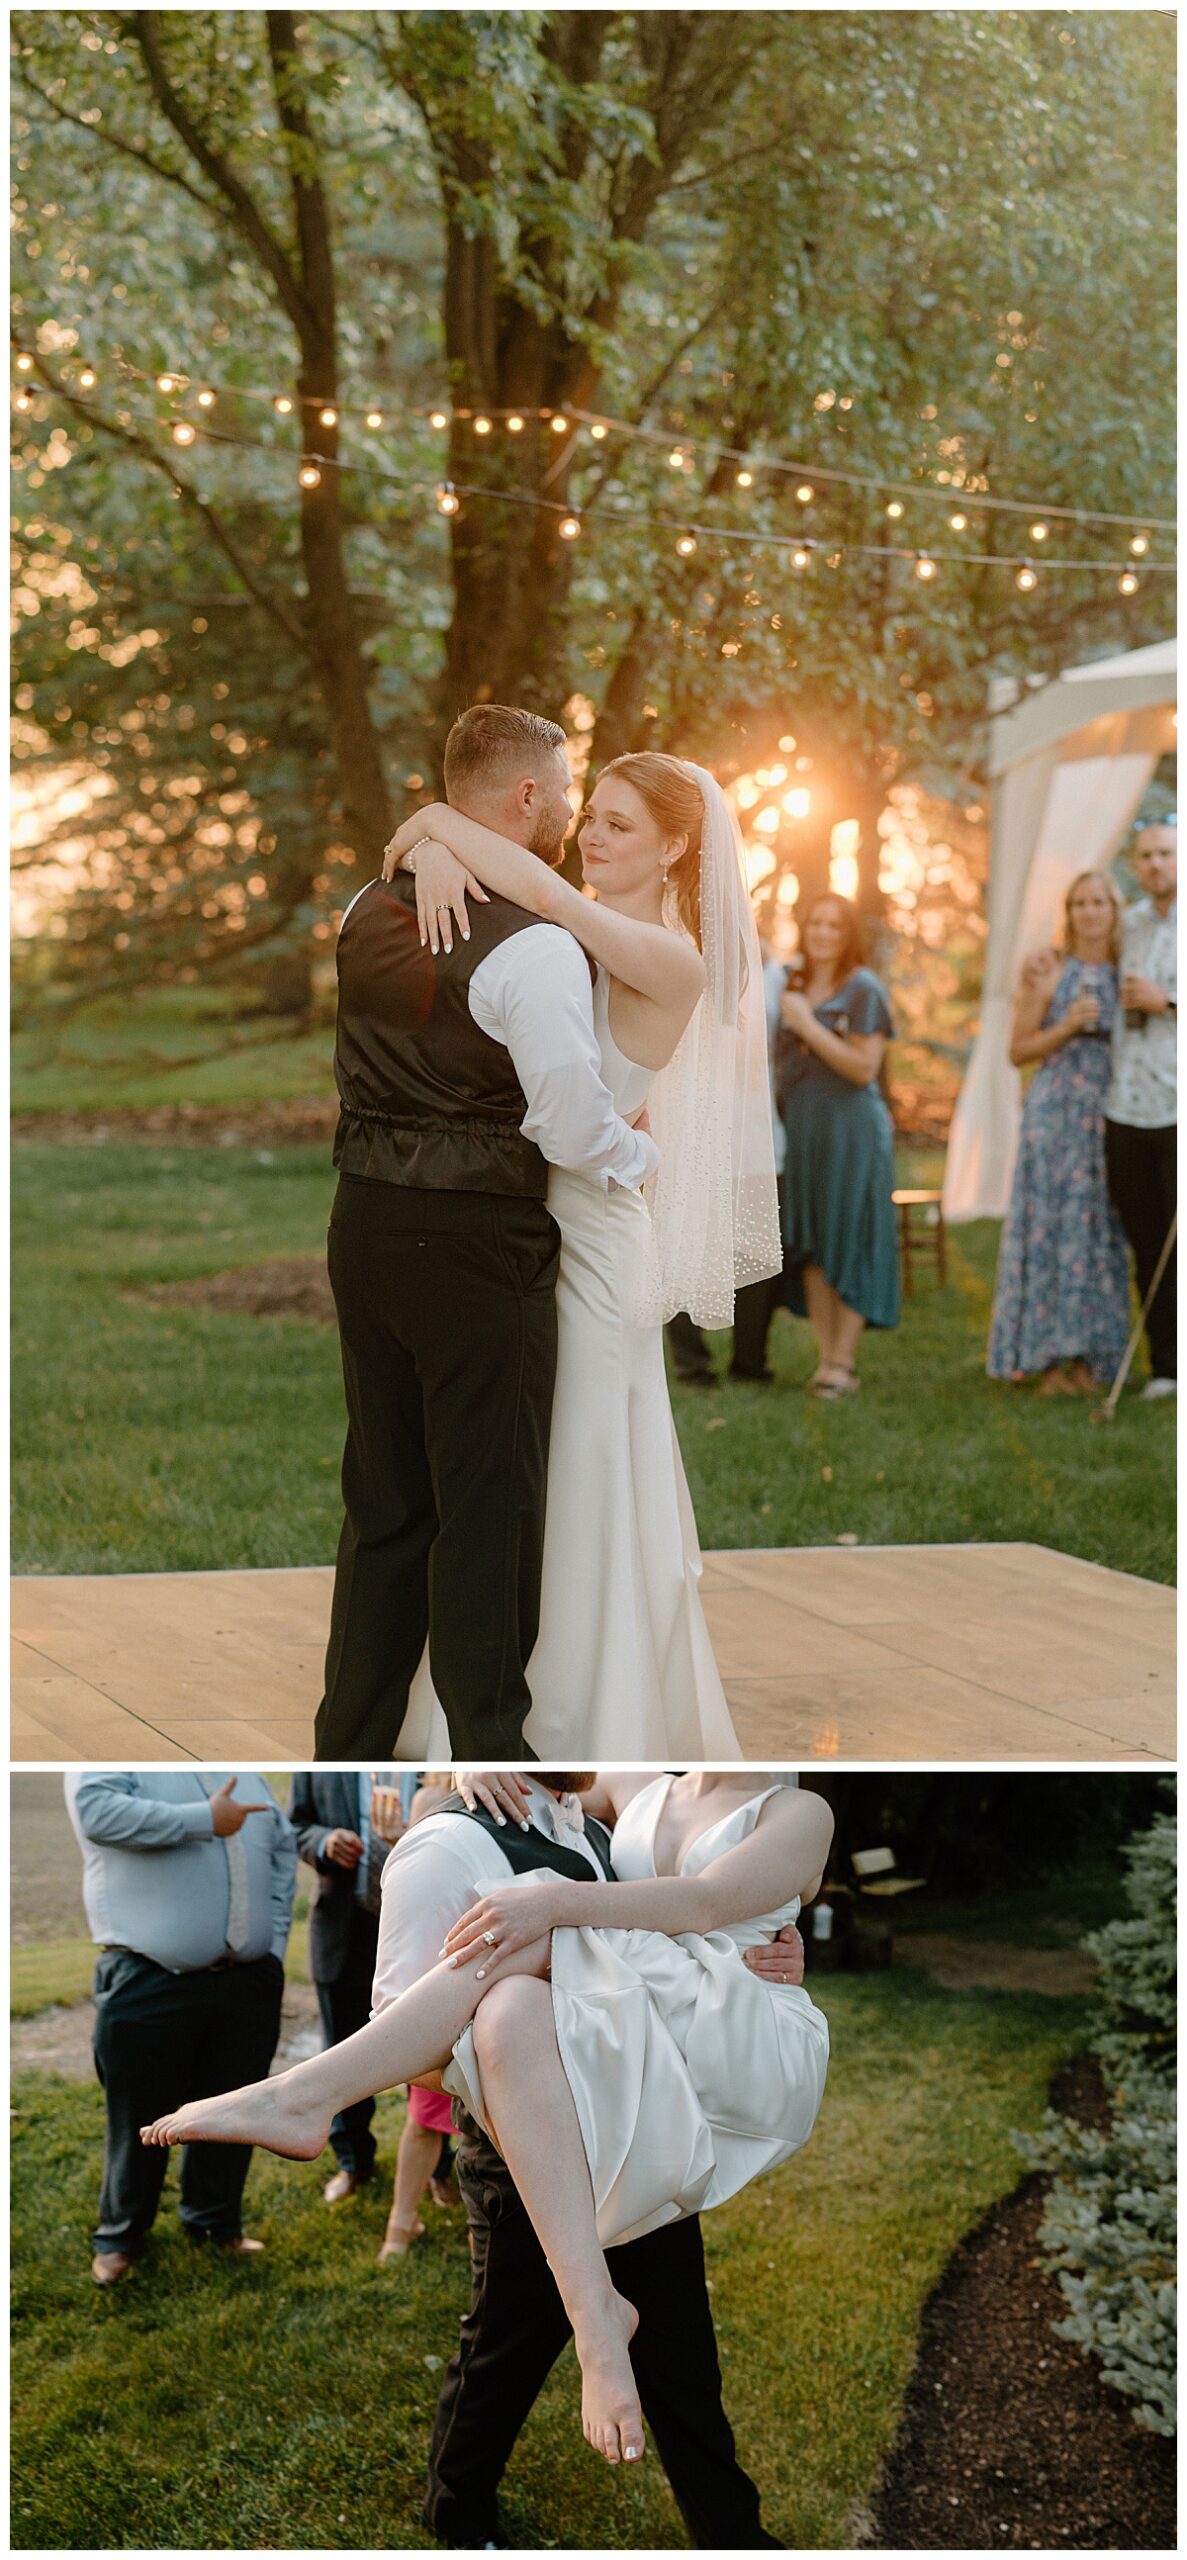 bride and groom share first dance as sun sets behind them at backyard summer celebration